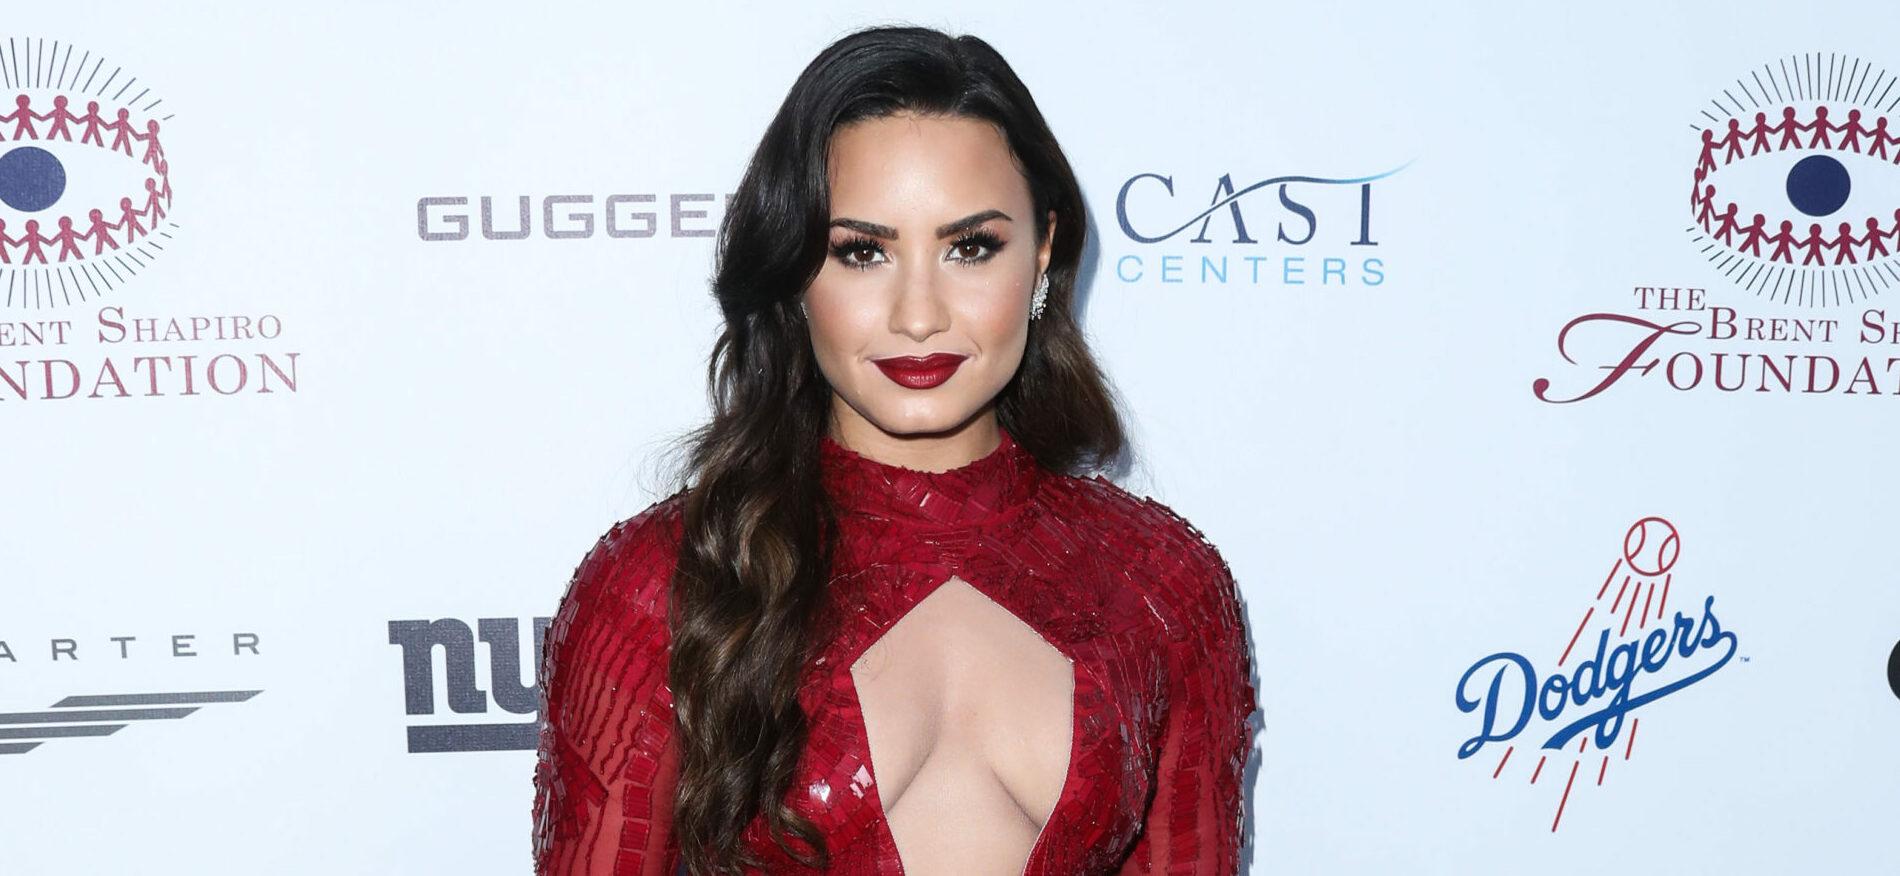 Demi Lovato at an event in a red dress